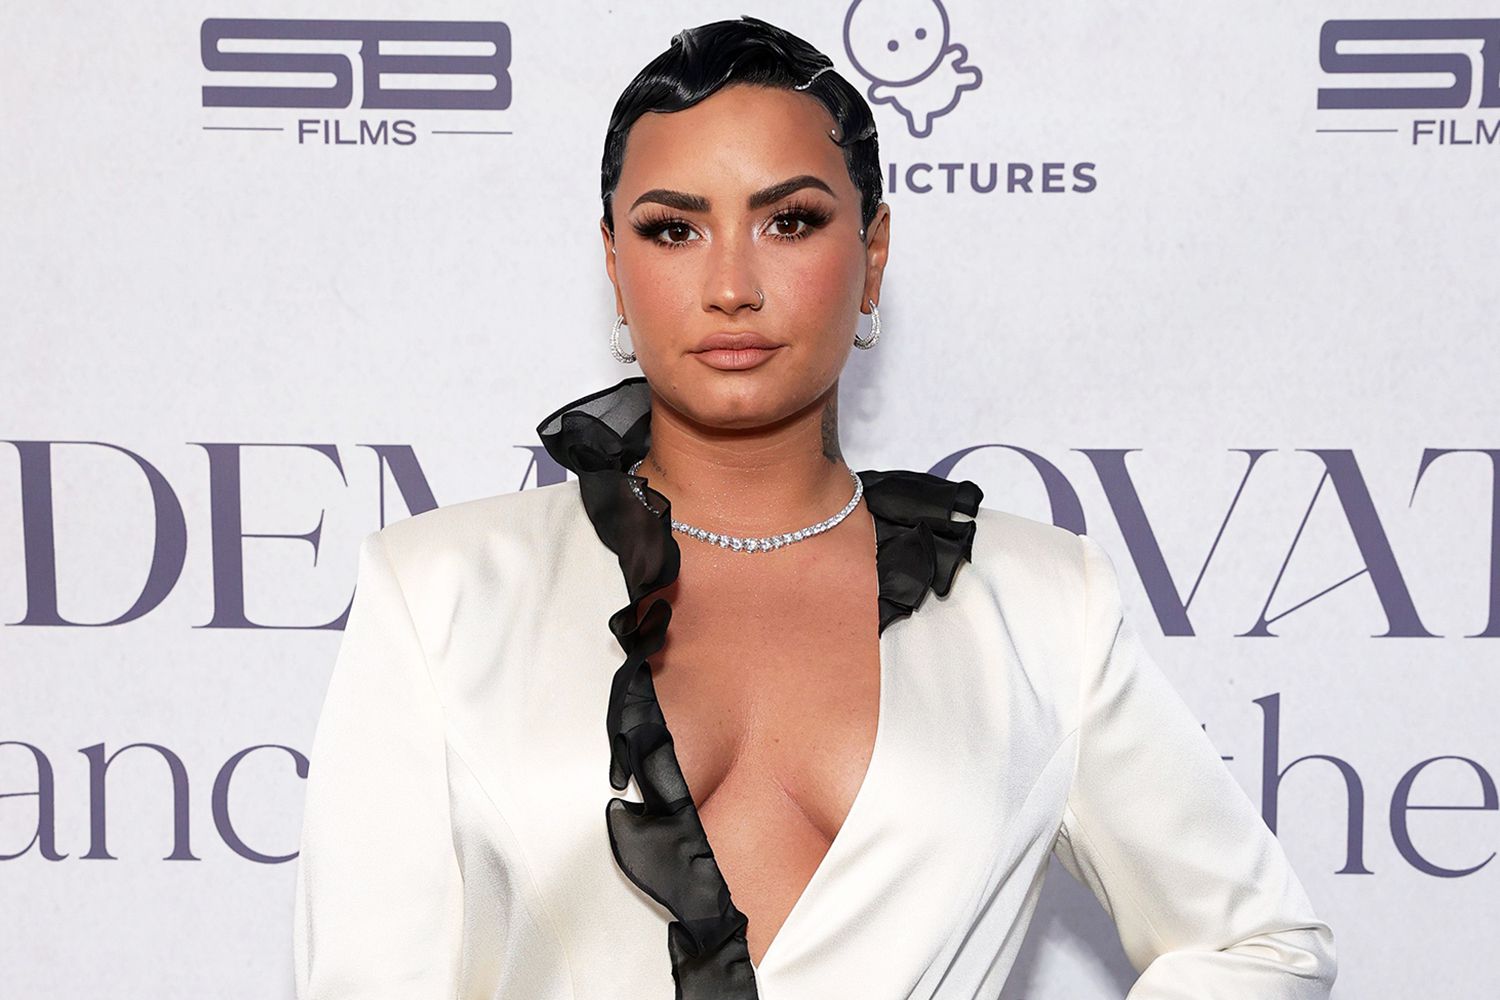 Demi Lovato attends the OBB Premiere Event for YouTube Originals Docuseries "Demi Lovato: Dancing With The Devil" at The Beverly Hilton on March 22, 2021 in Beverly Hills, California.